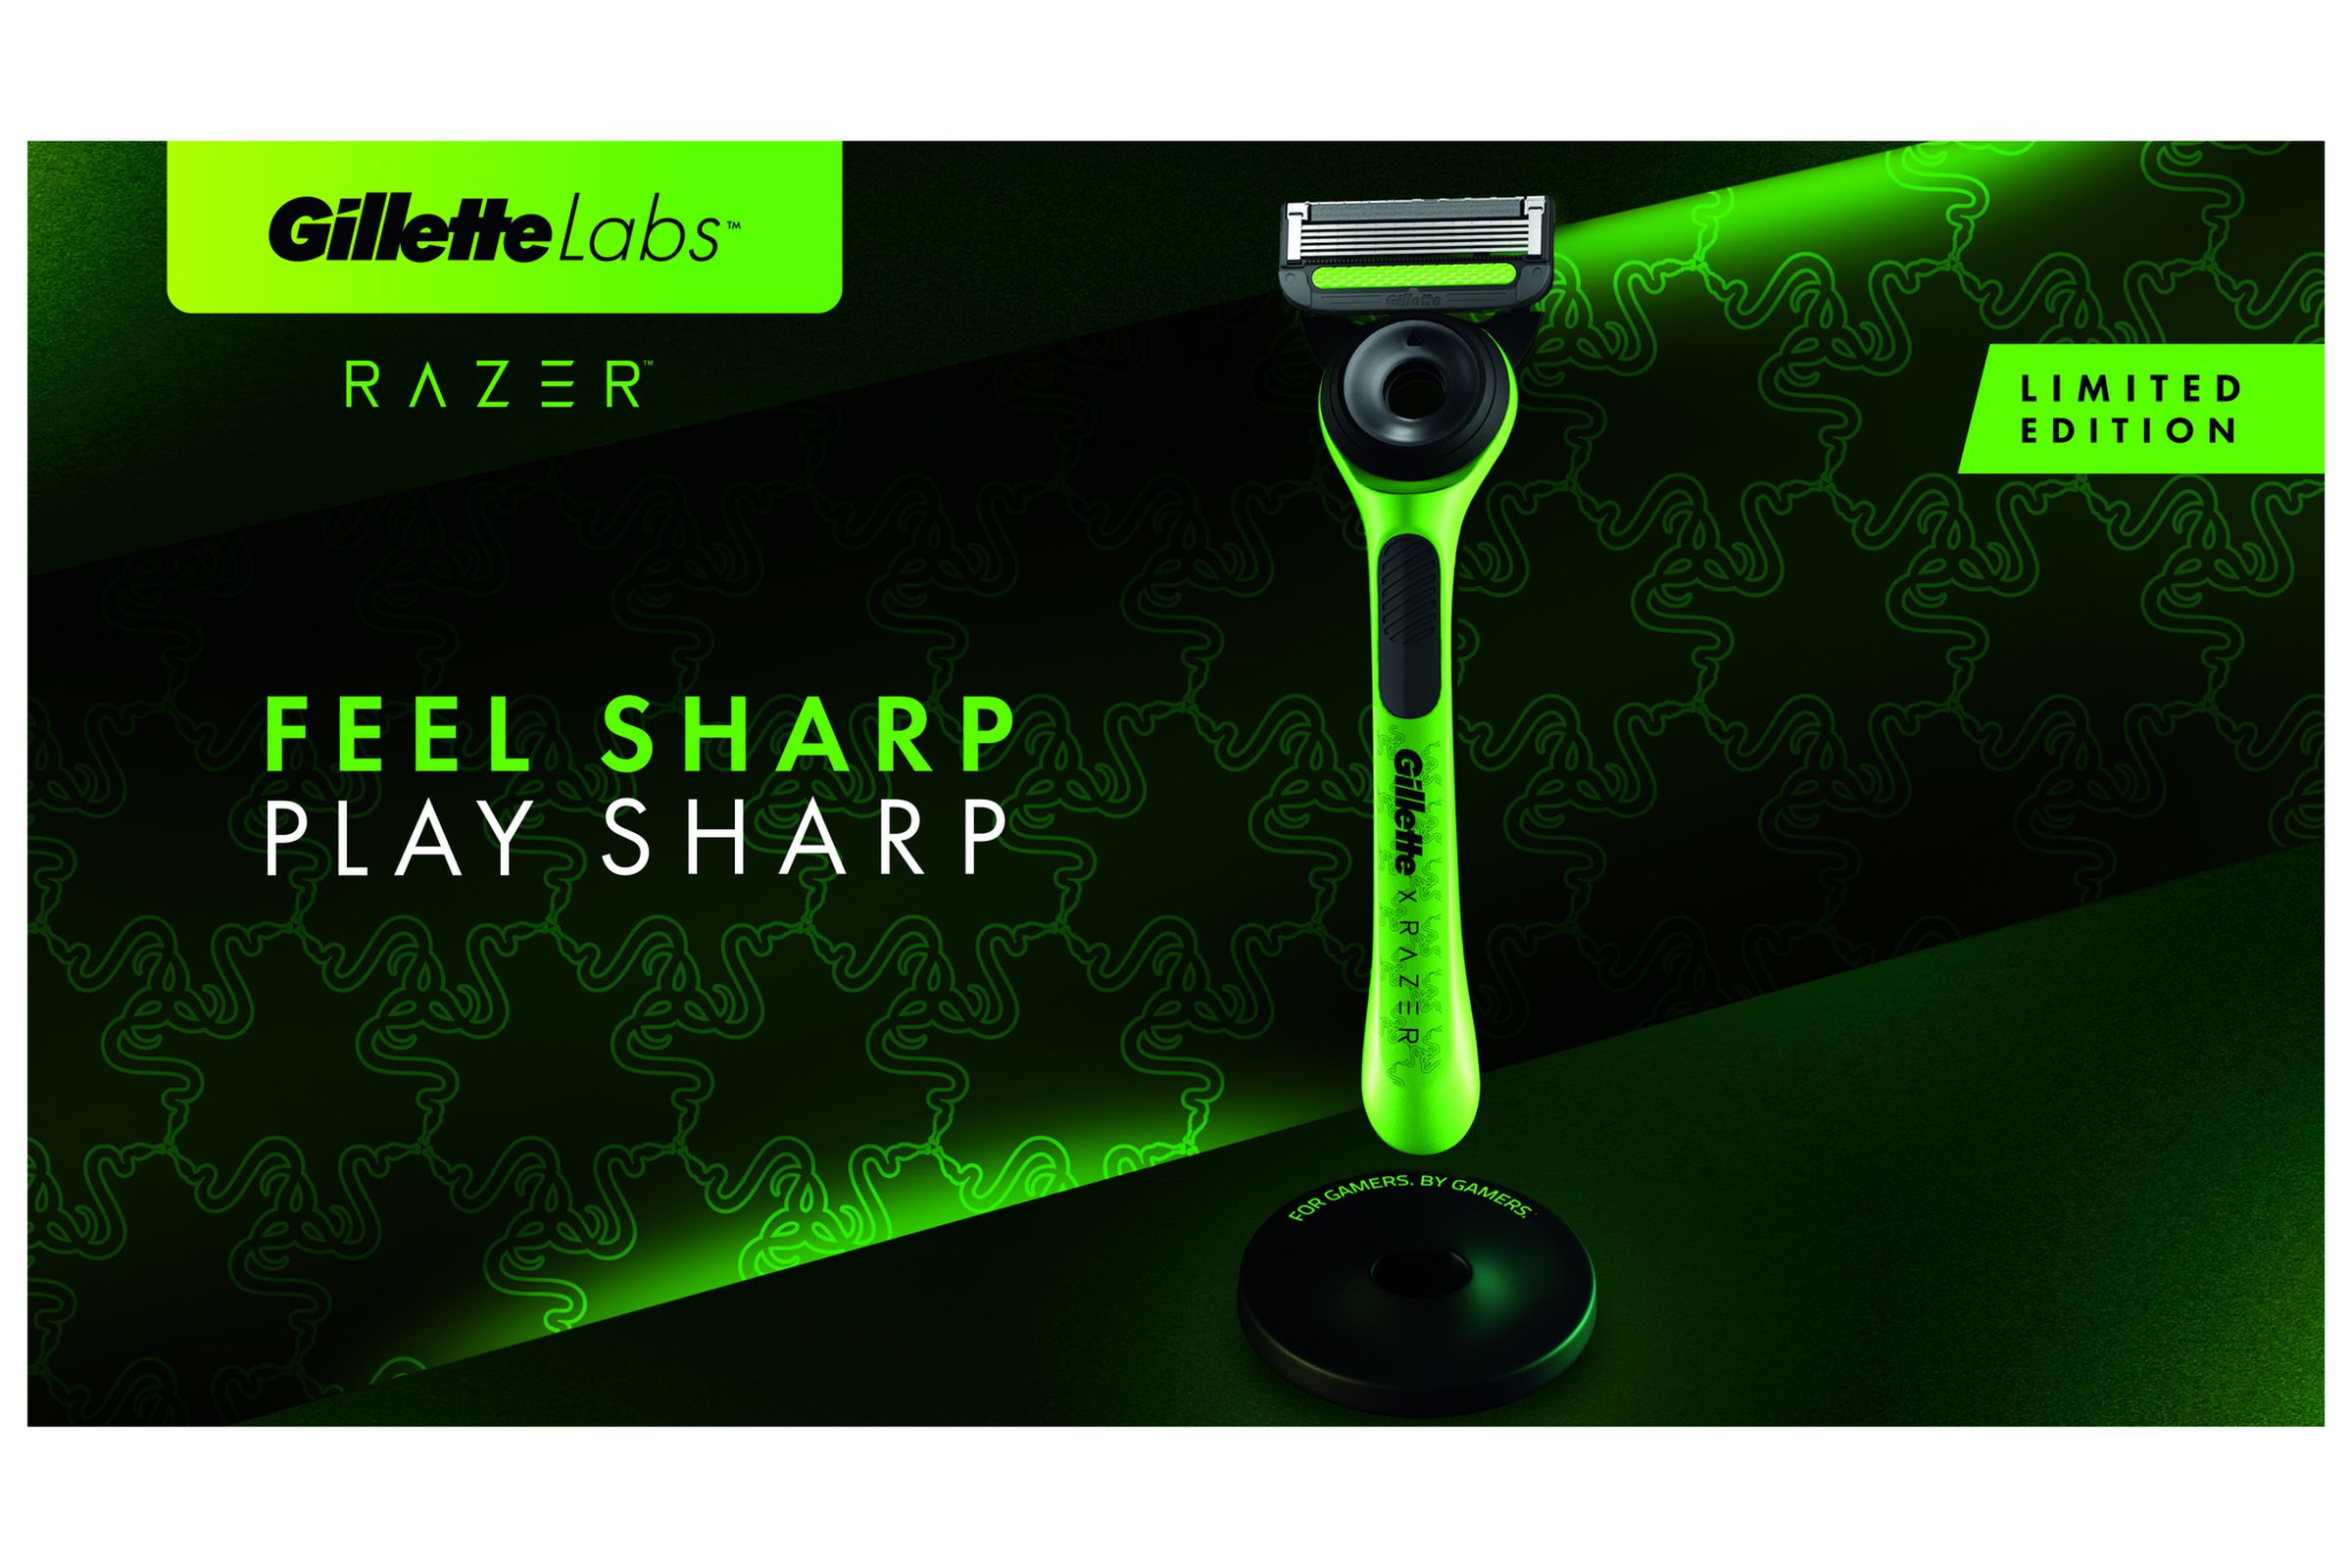 Press shot of GilletteLabs x Razer razor. The razor handle itself is Razer green, the magnetic stand is black, and the promo image has lots of black and green on it. It reads “Feel sharp / play sharp,” and has the words “limited edition” and the Razer and GilletteLabs logos.